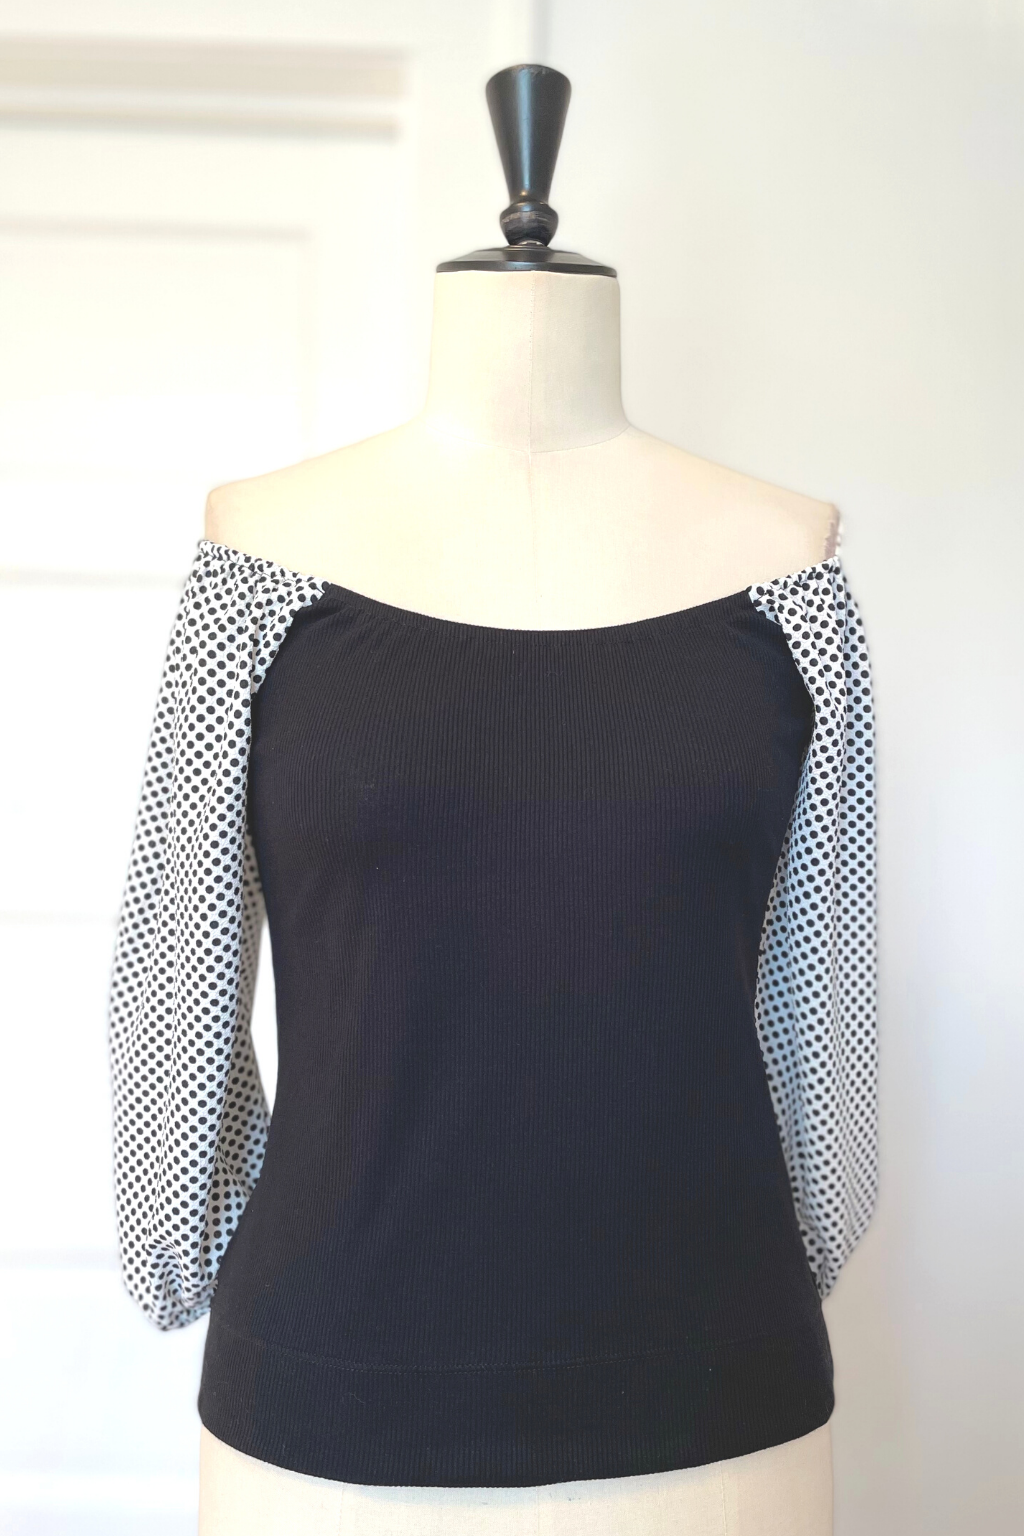 KOKOON Hutton Square Neck Top in Black Rib Knit With White and Black Polka Dot Sleeves Off Shoulder Front